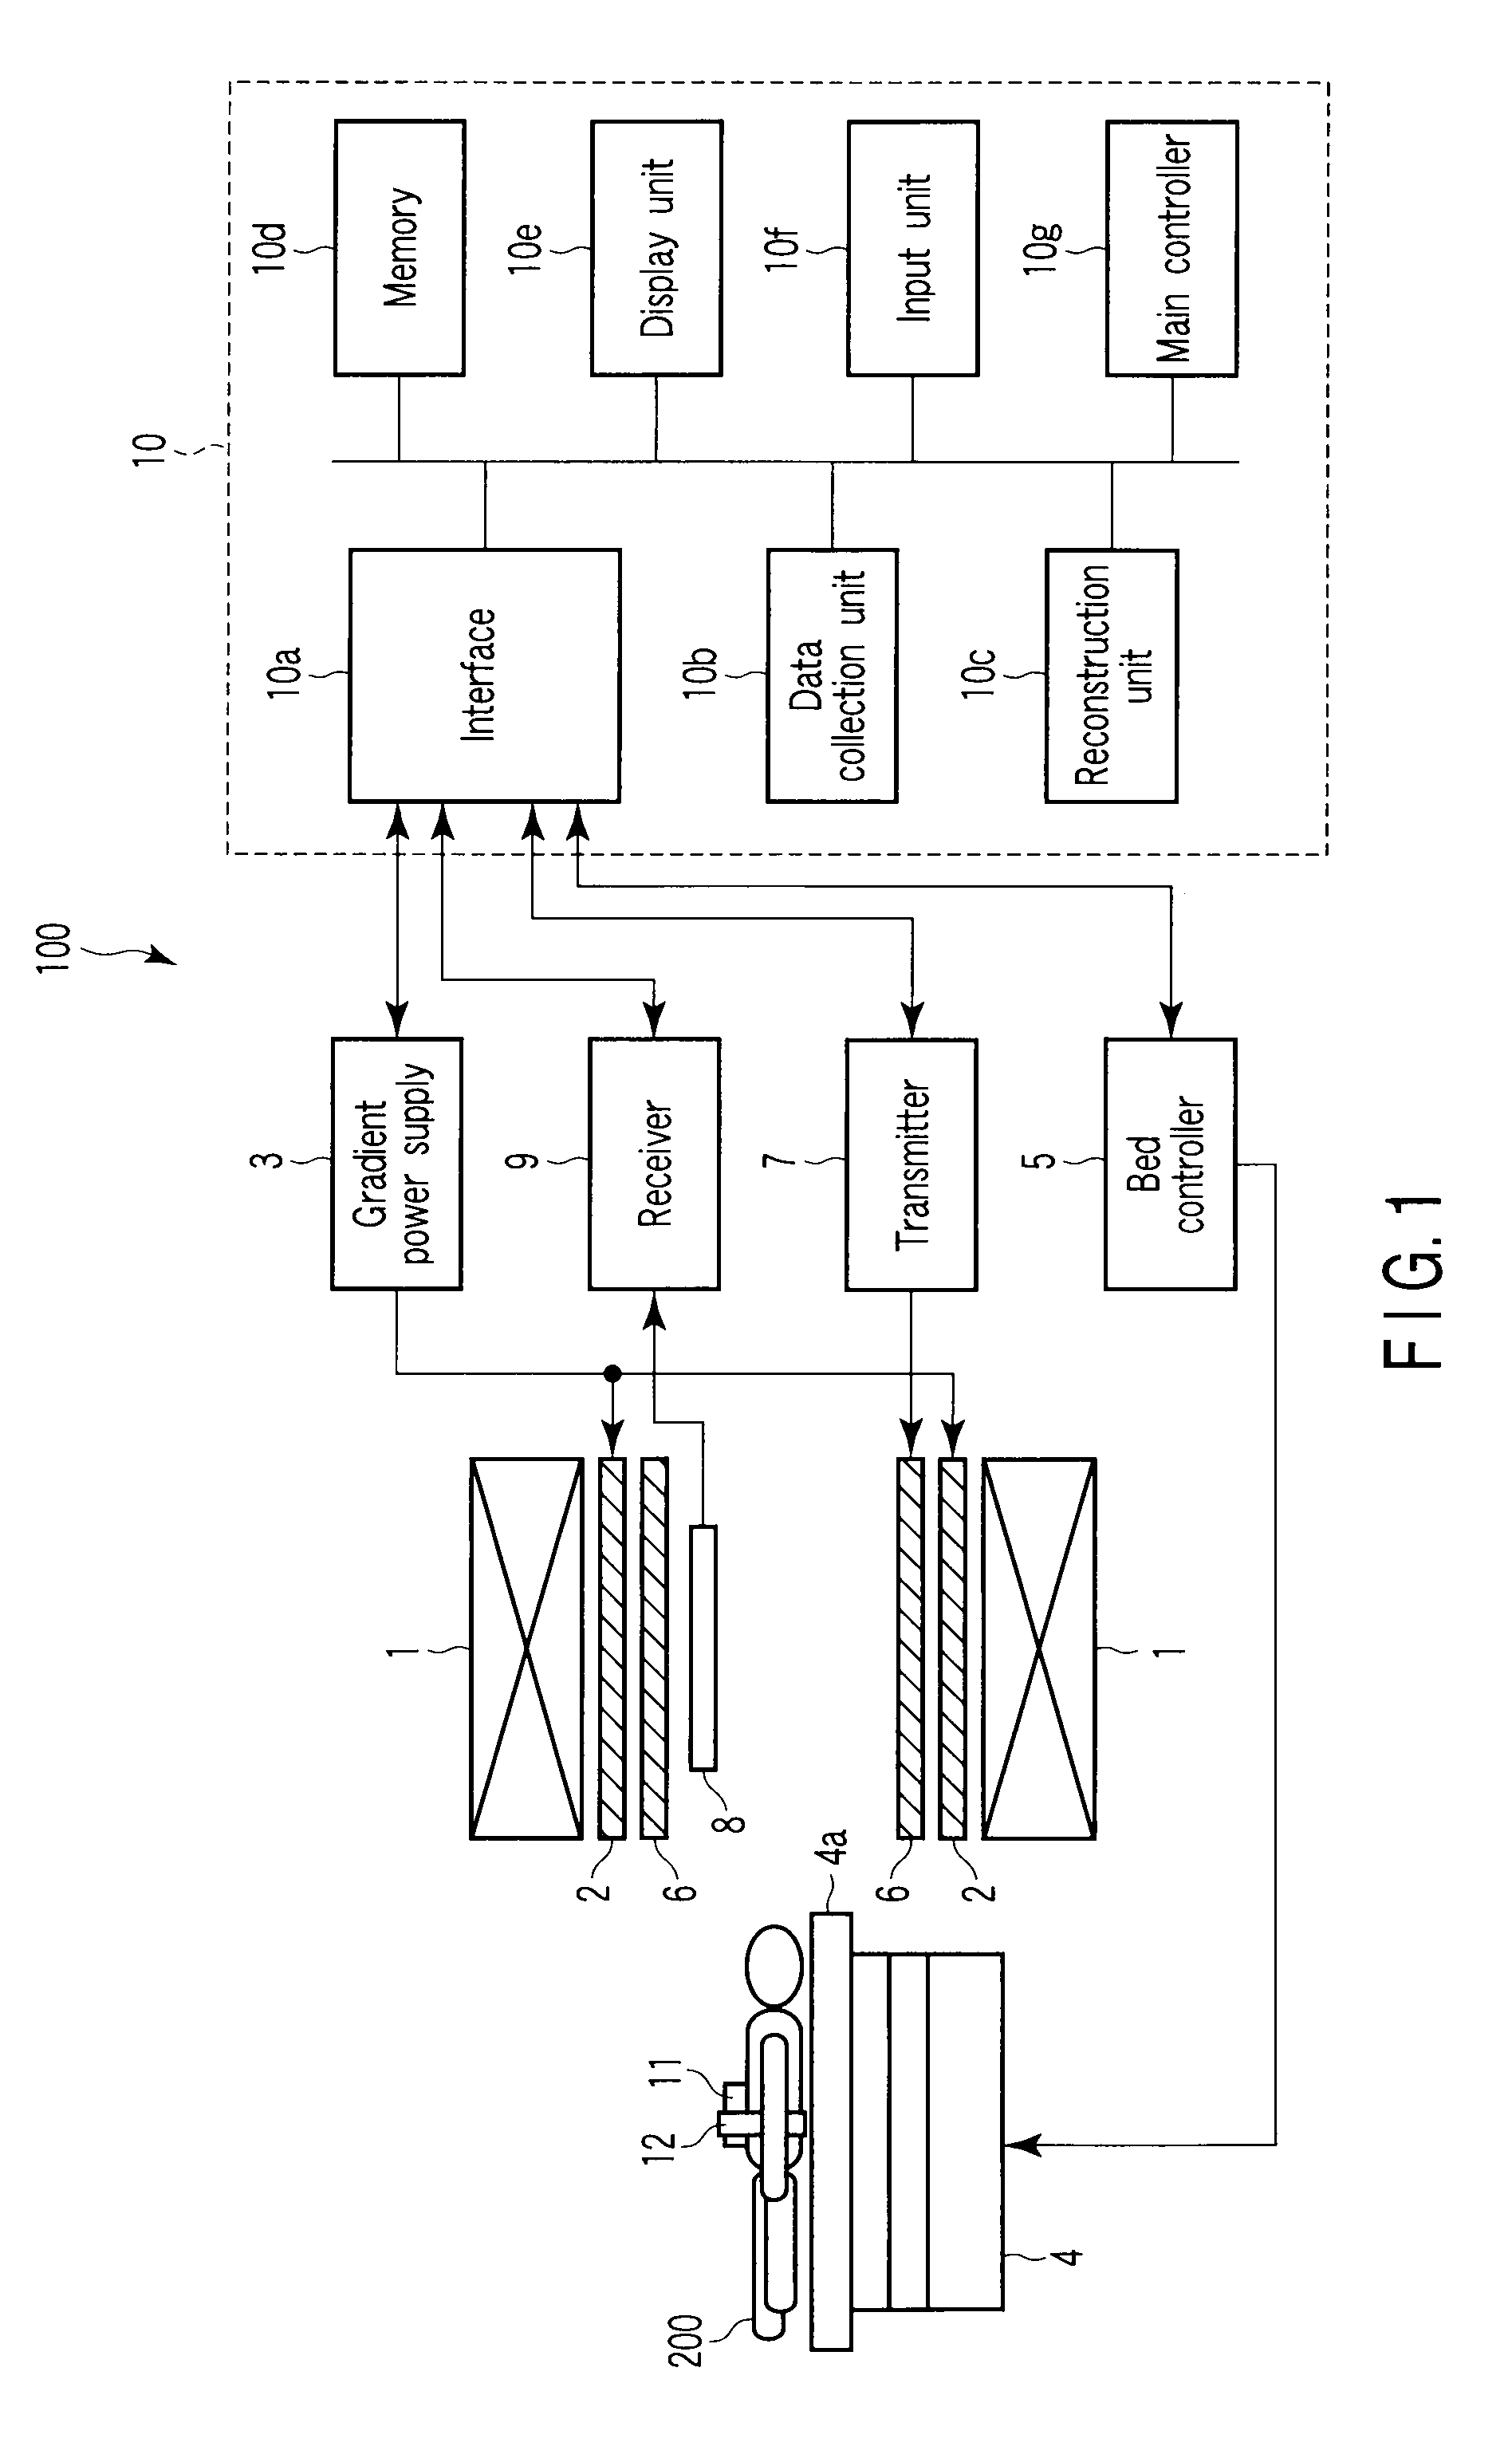 Respiration suppressing mat and magnetic resonance imaging apparatus and method